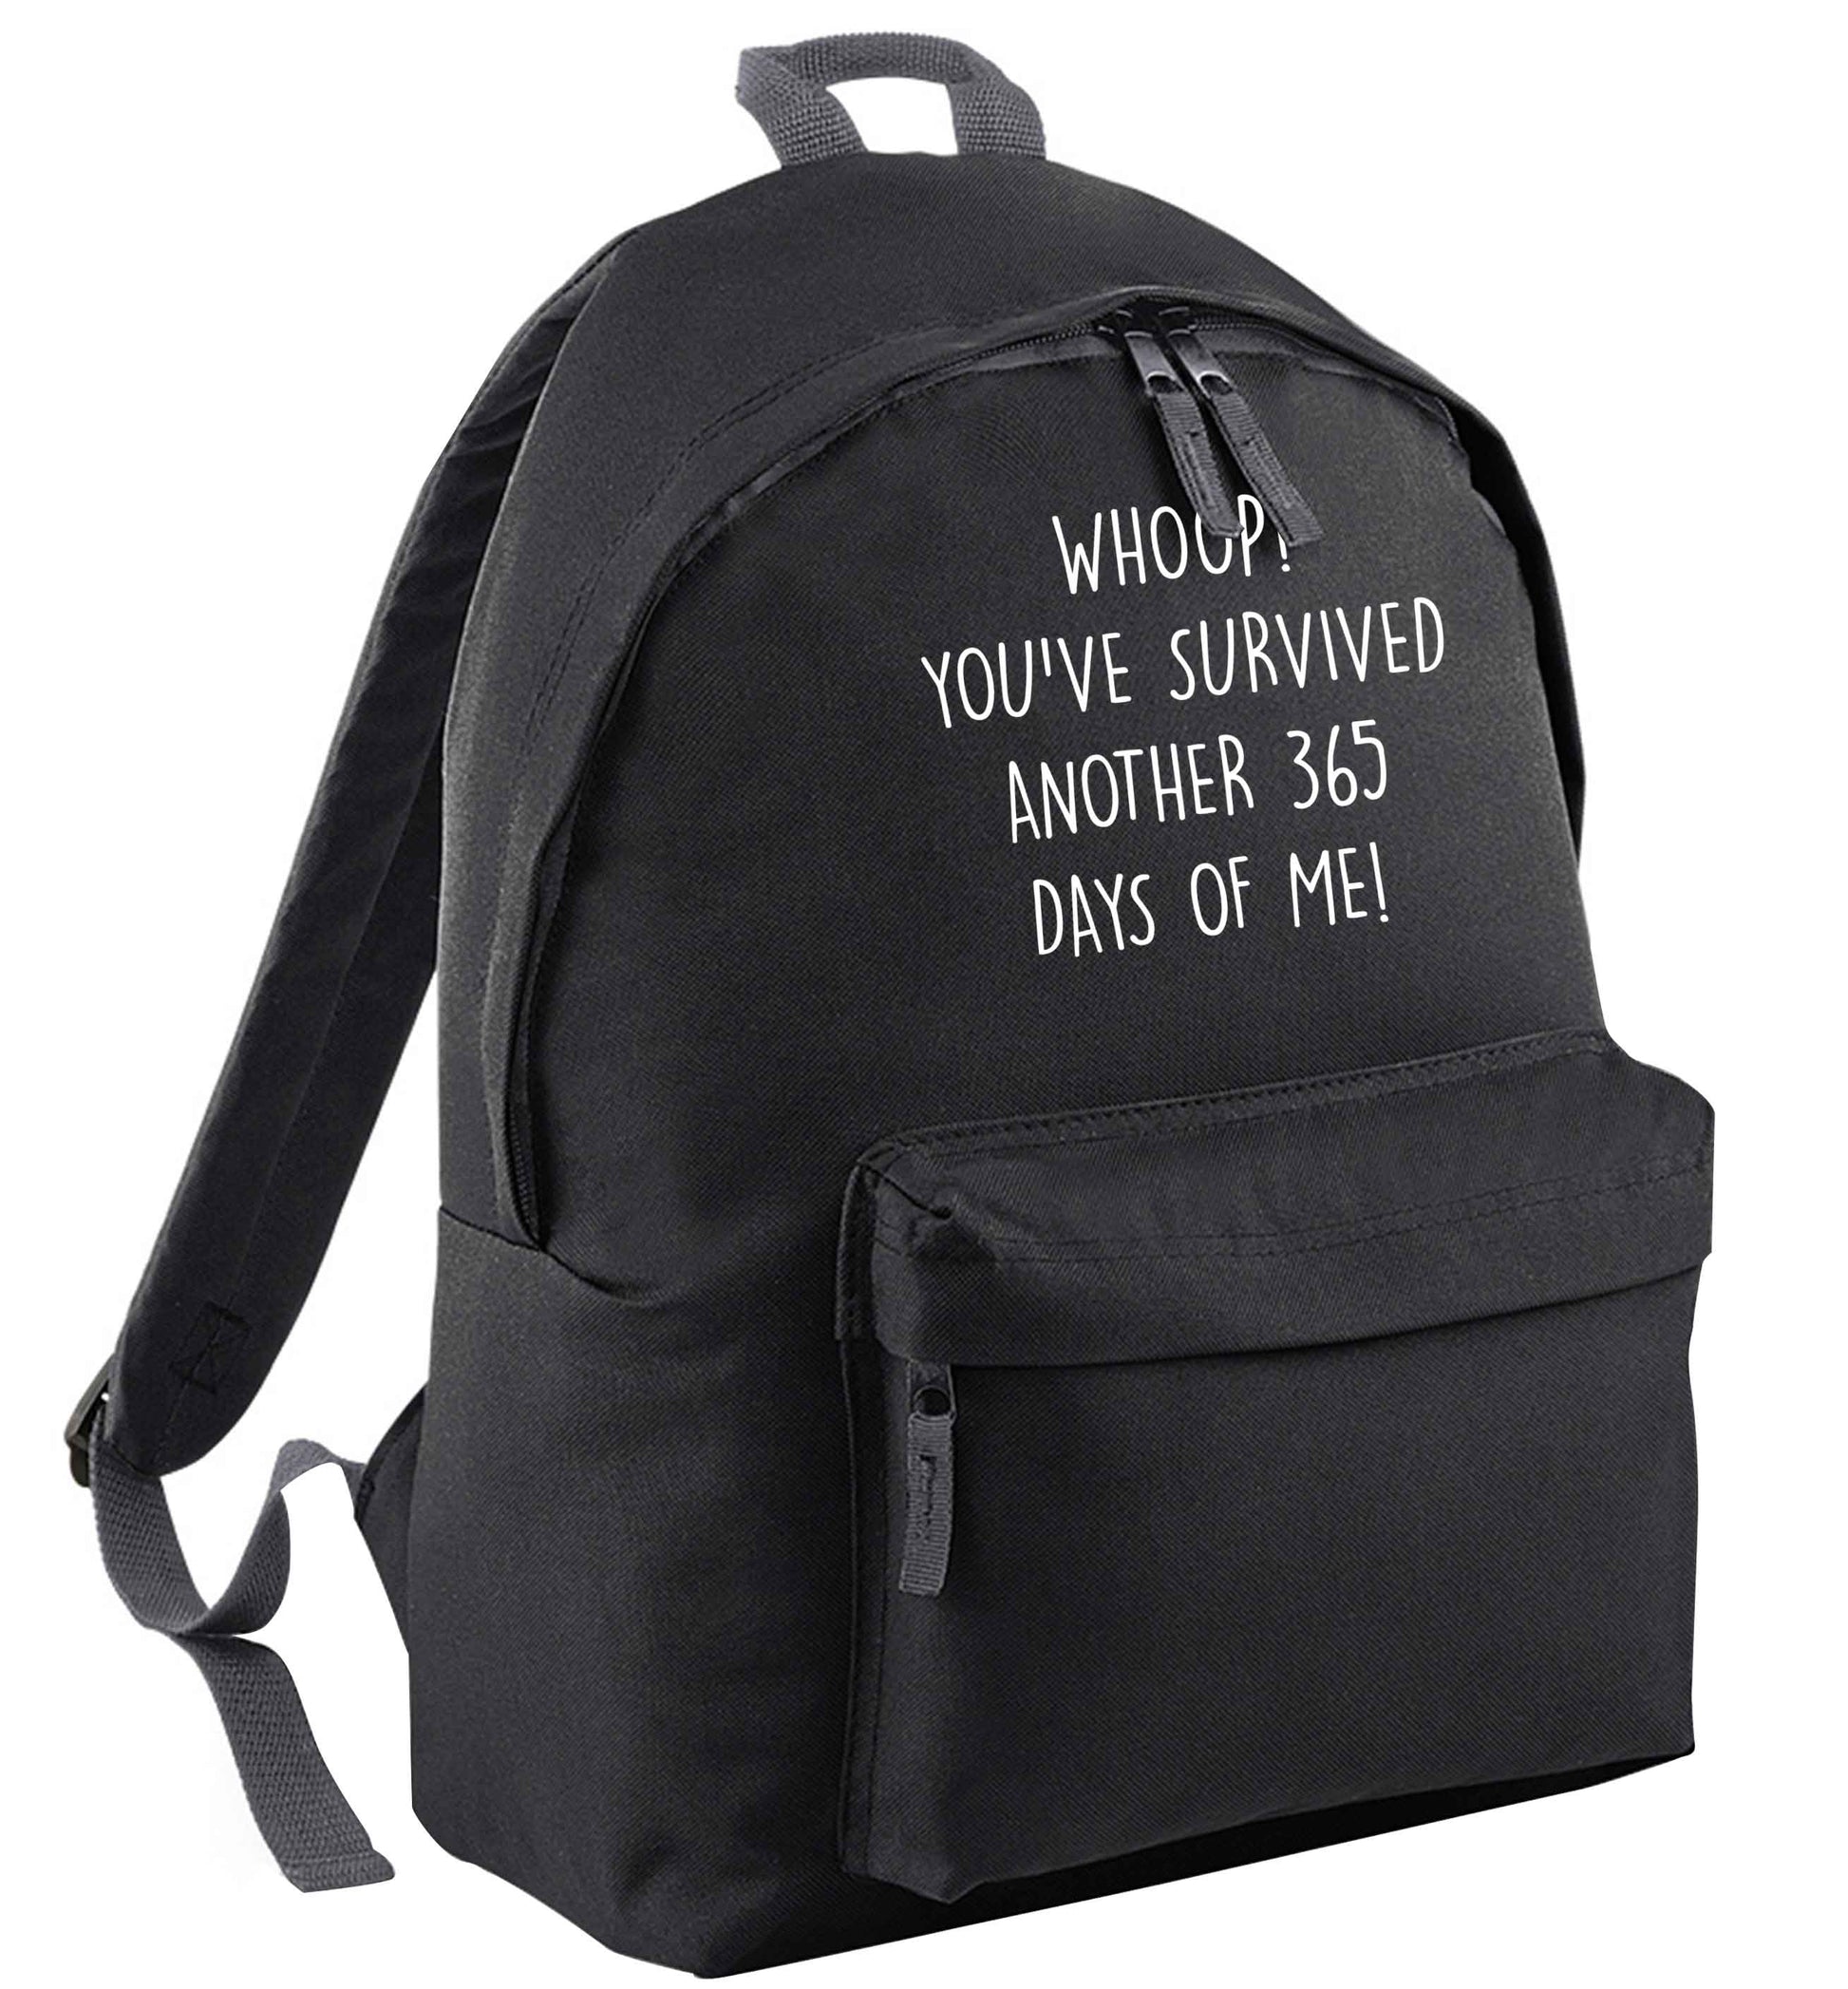 Whoop! You've survived another 365 days with me! black adults backpack